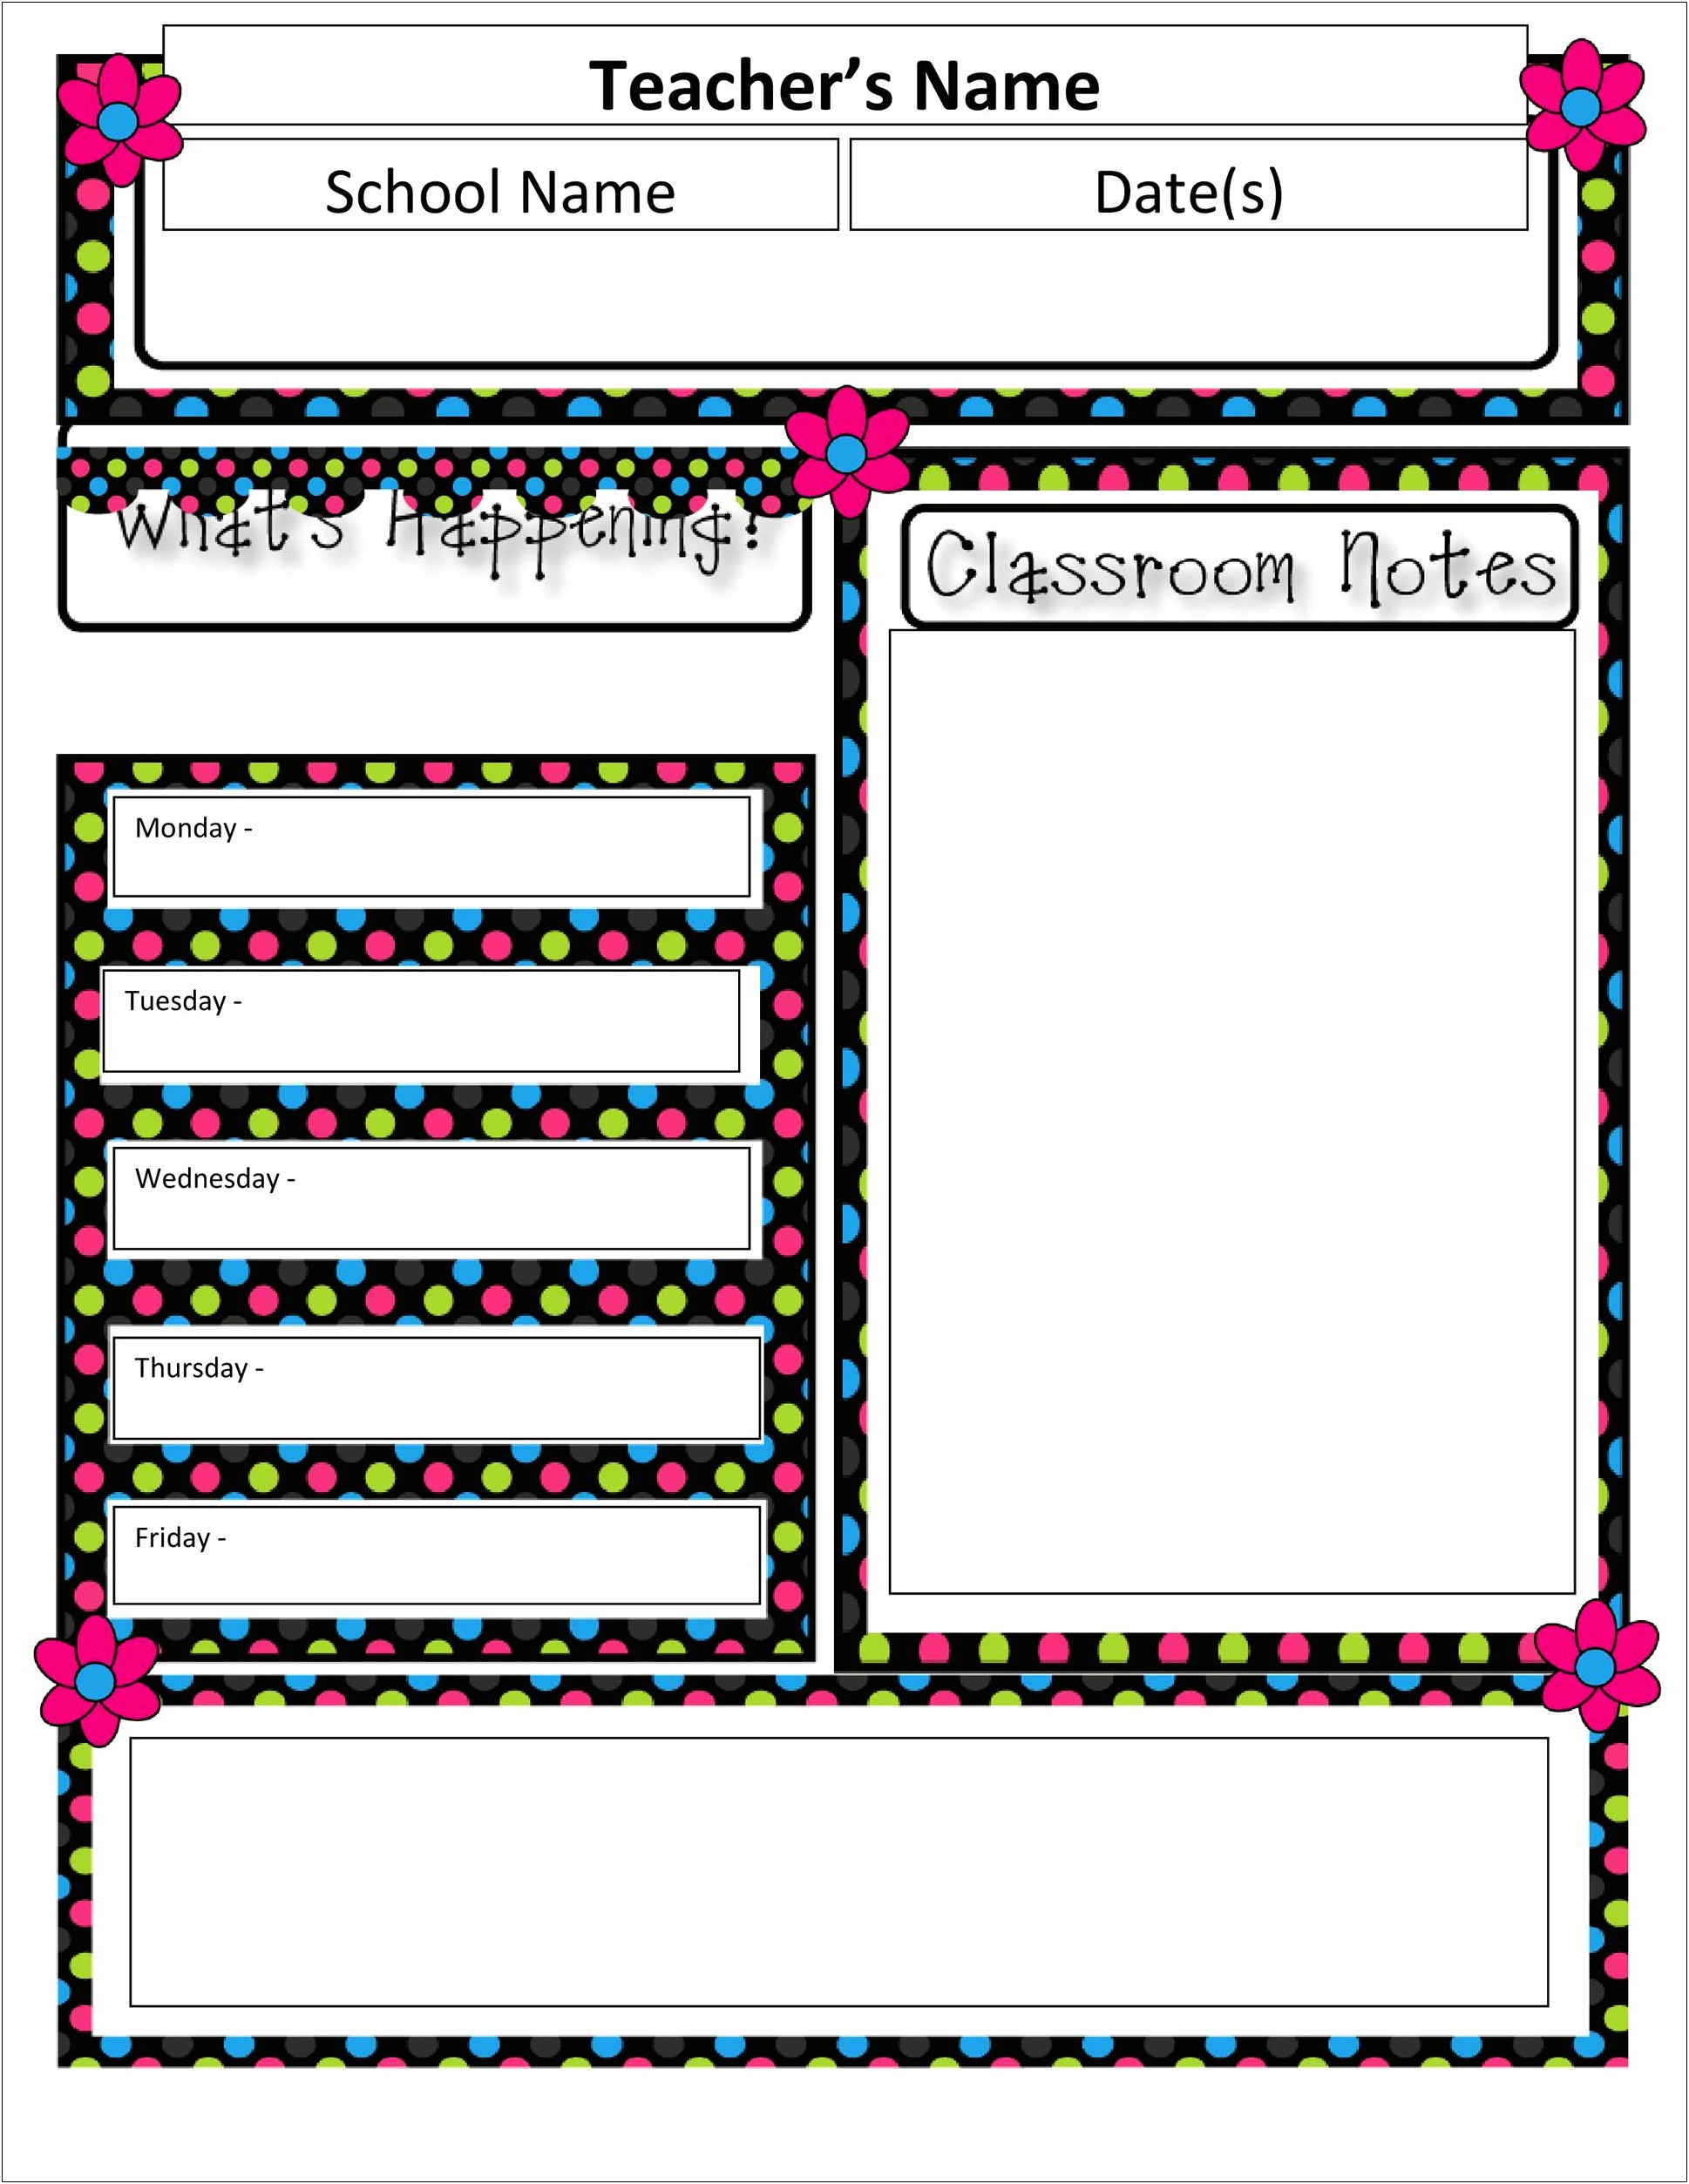 free-back-to-school-templates-for-teachers-templates-resume-designs-a81b7qkvao